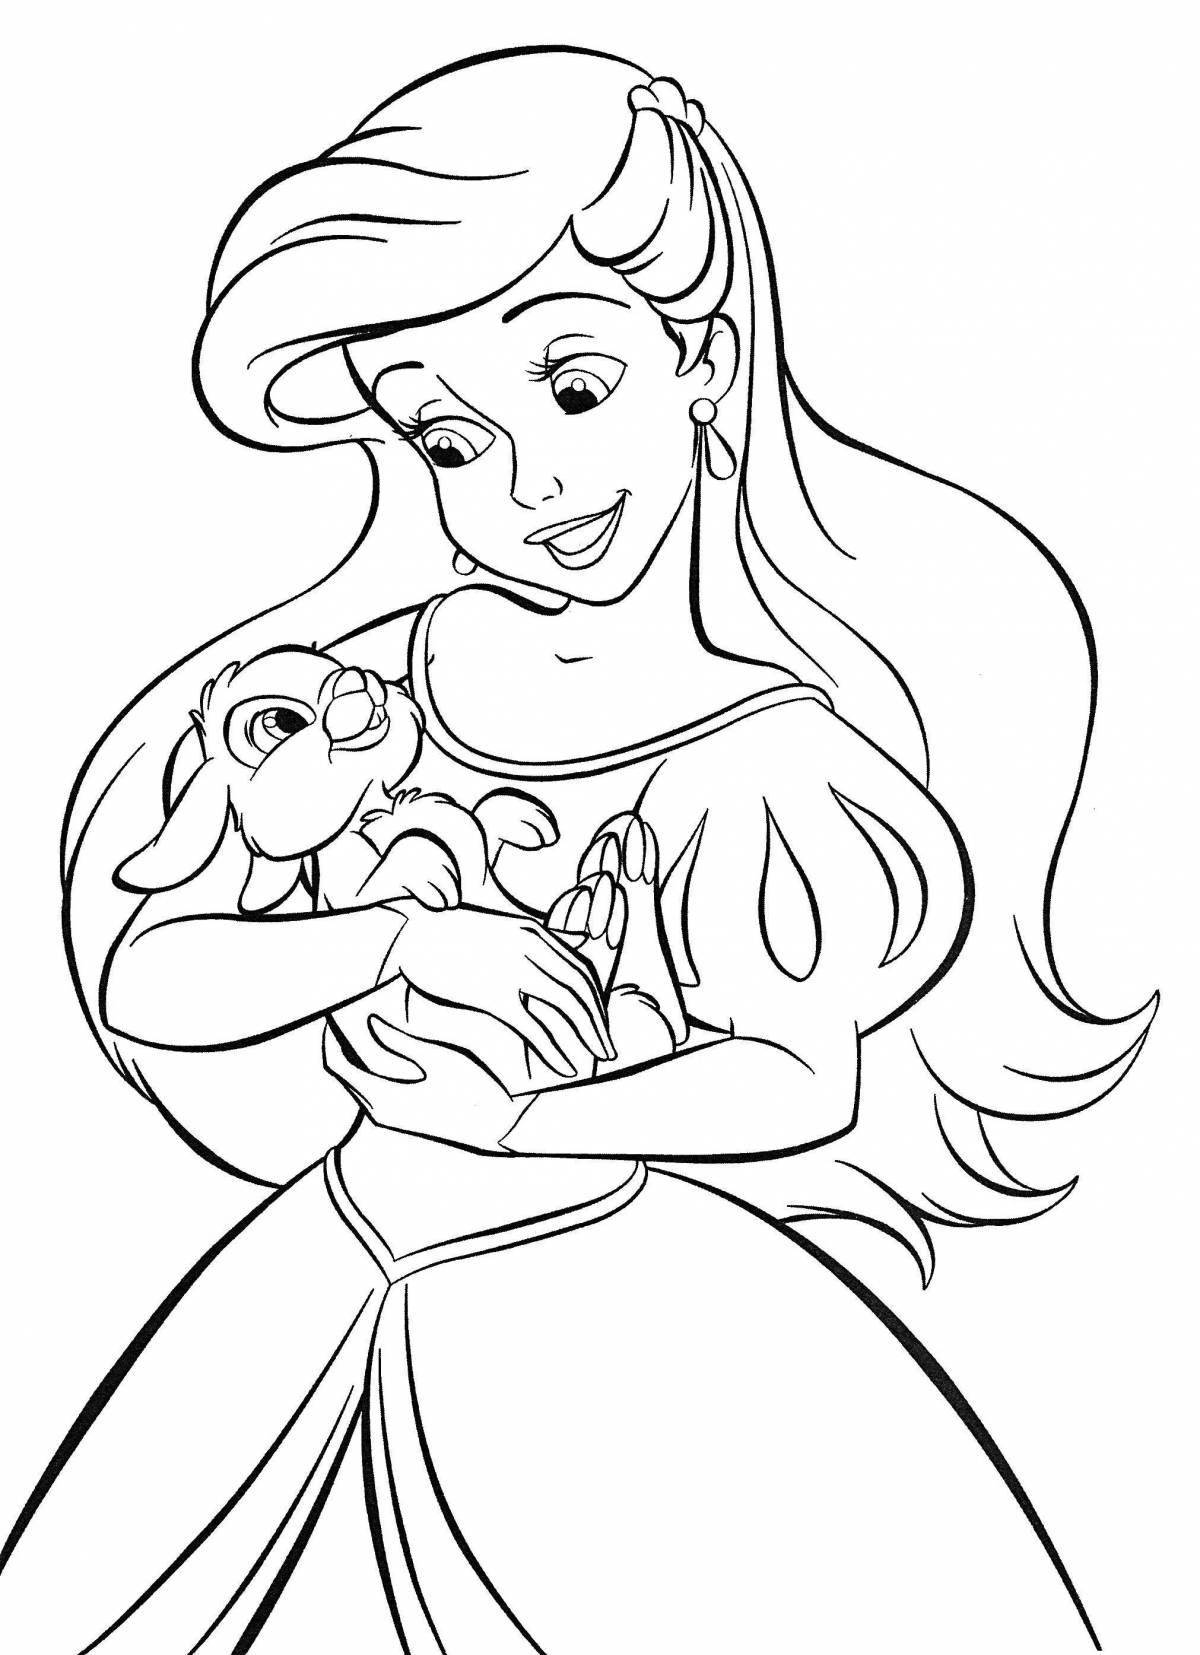 Lora's amazing coloring page